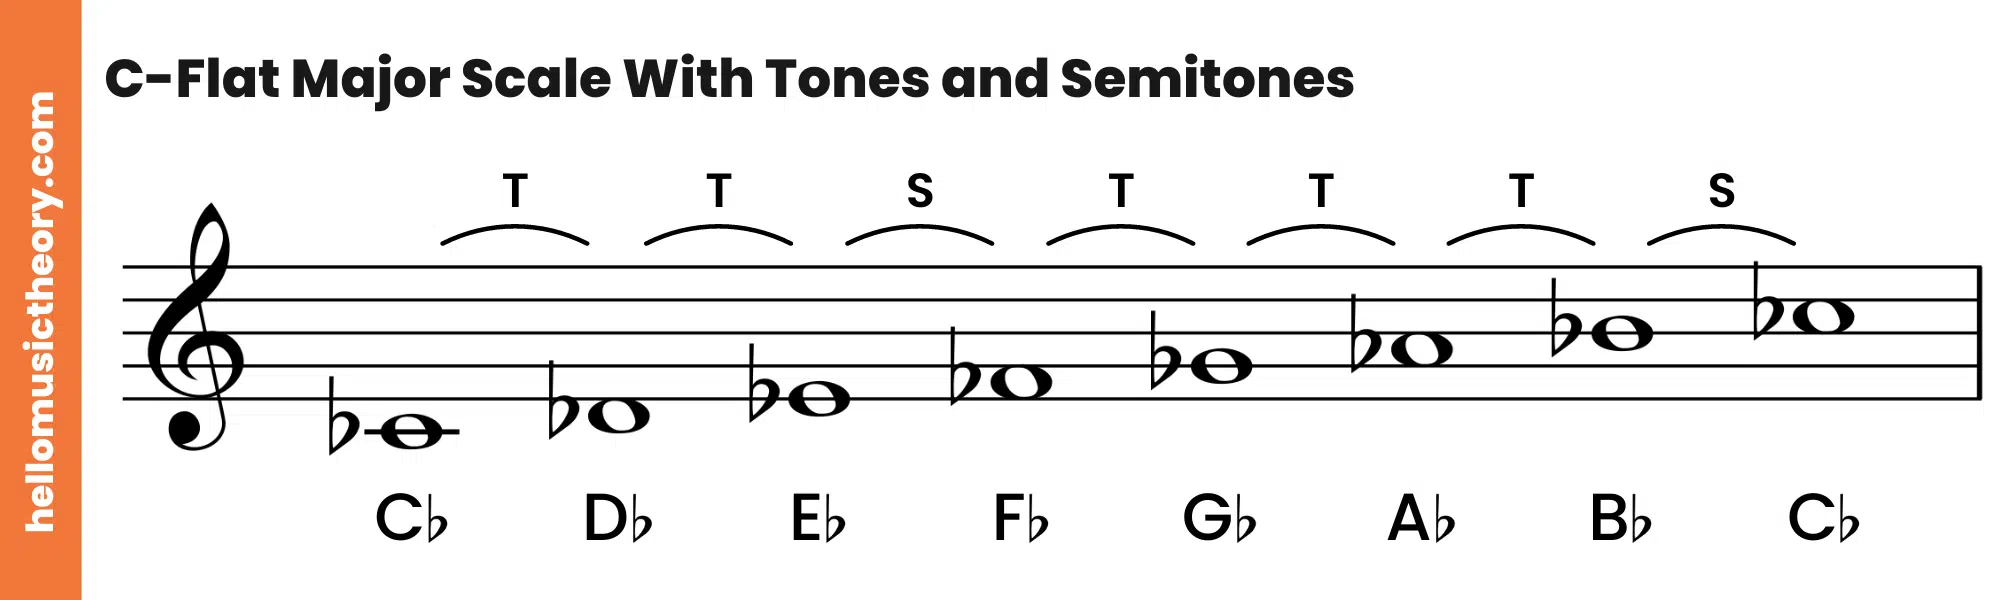 C-Flat Major Scale Treble Clef With Tones and Semitones